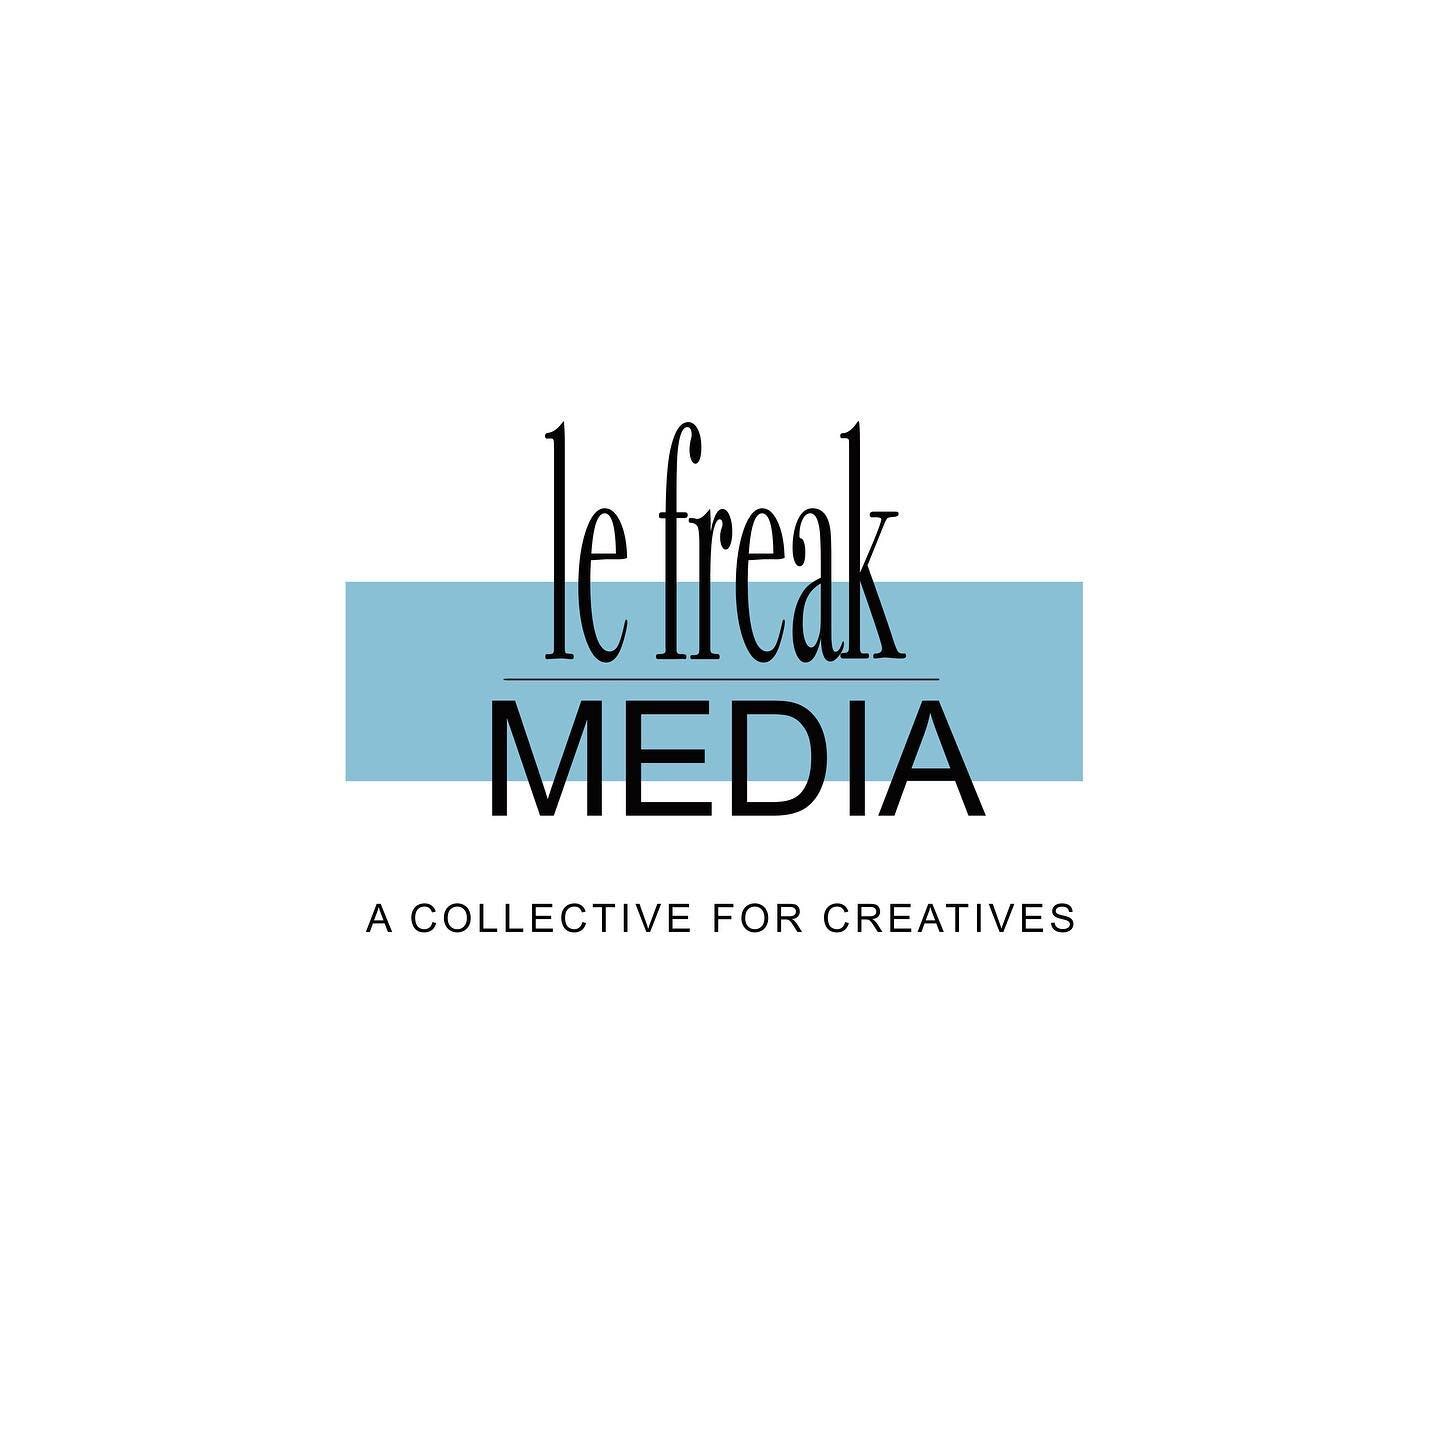 Welcome to your new home! We know that artists can be considered &ldquo;freaks&rdquo; but we&rsquo;ll take it as a compliment. #lefreakmedia